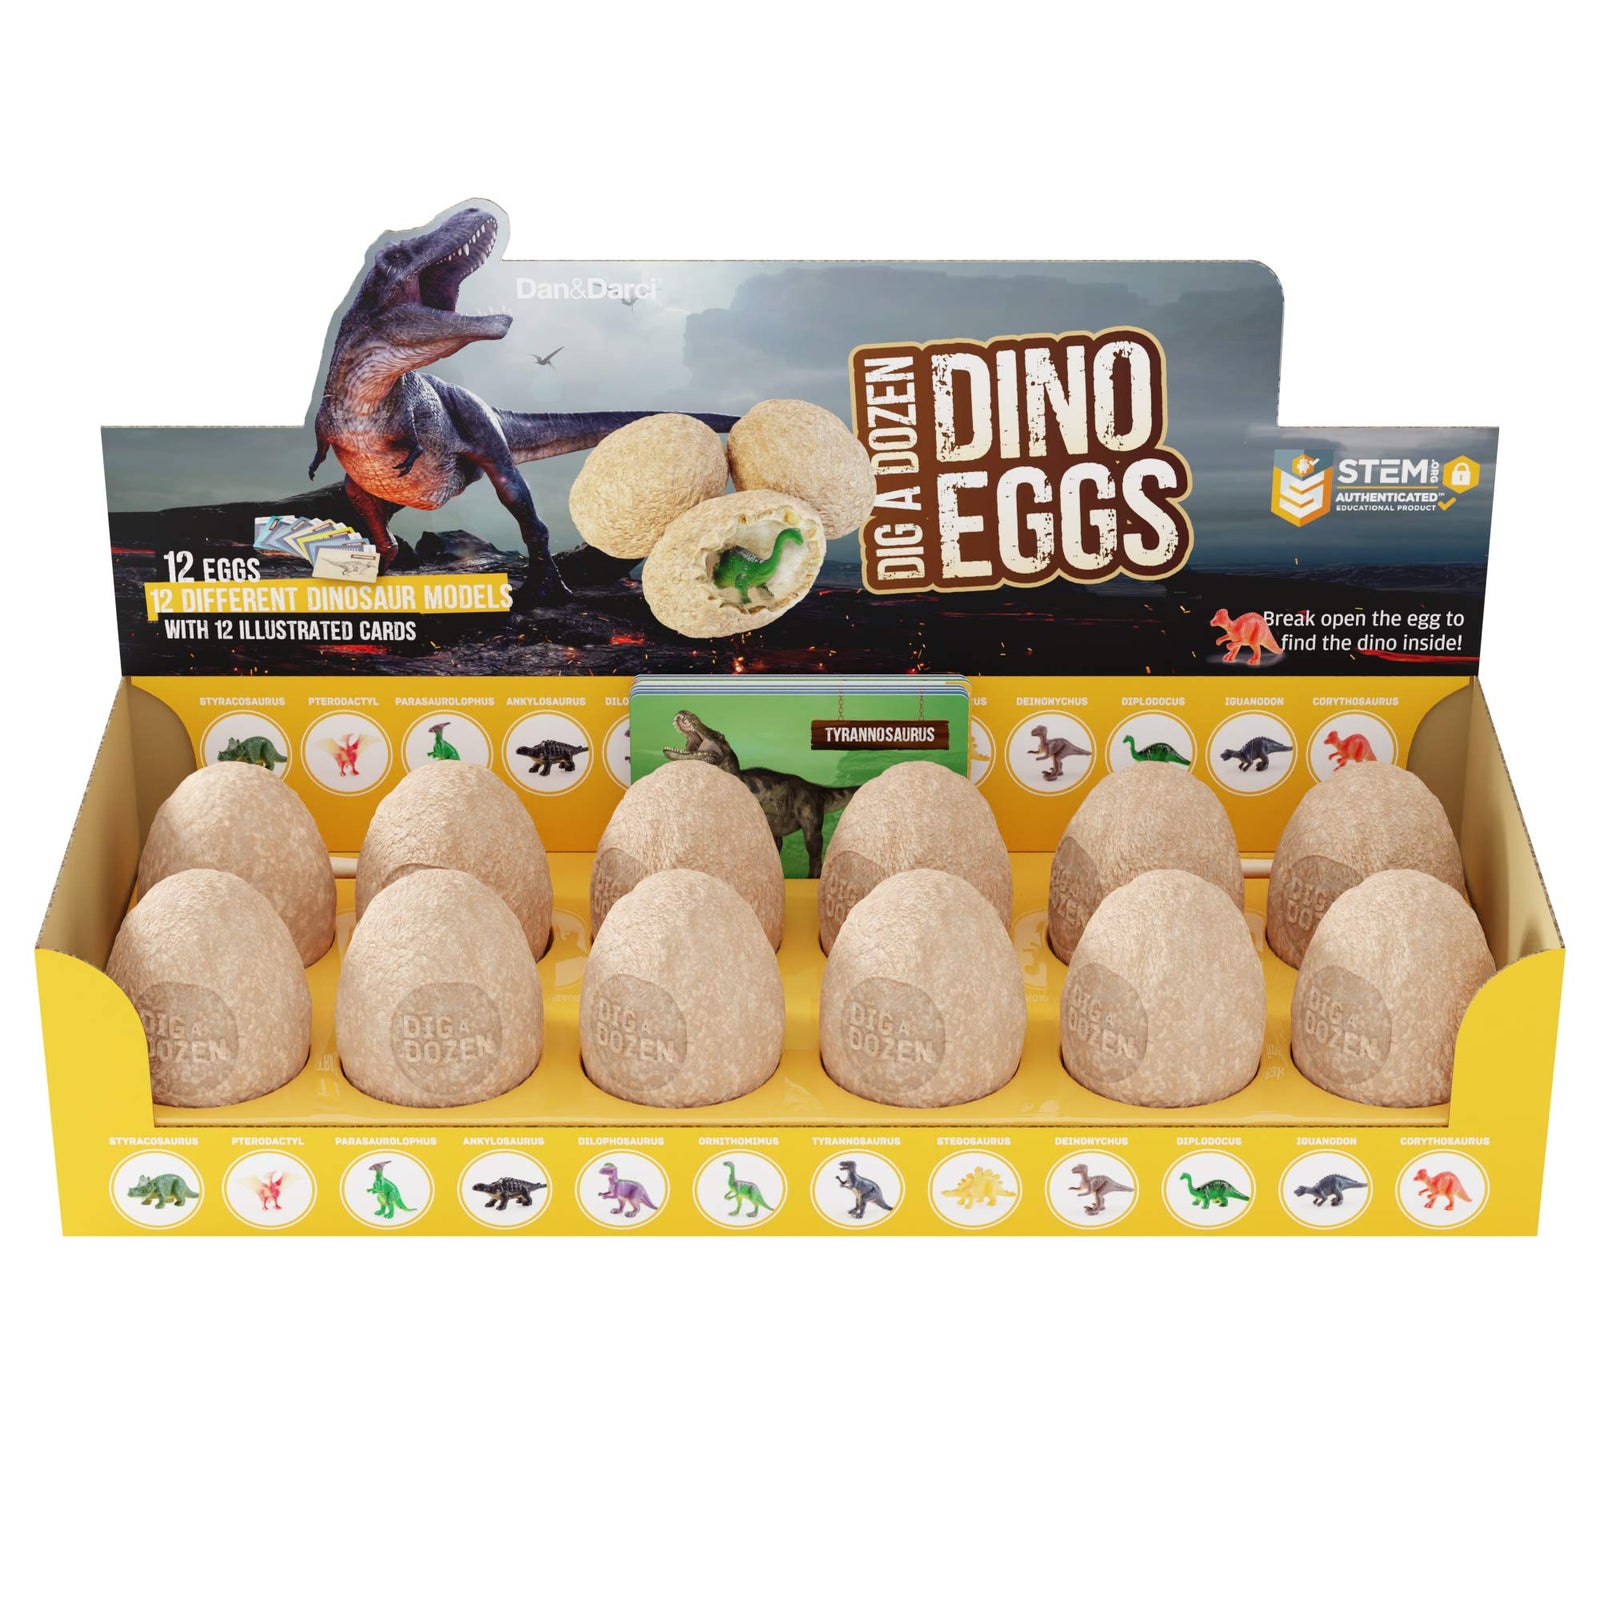 Dig a Dozen Dino Egg Dig Kit - Easter Egg Dinosaur Toys for Kids - Dig up 12 Eggs & Discover Surprise Dinosaurs. Science STEM Activities - Educational Gifts for Boys & Girls Age 3-5 5-7 8-12 Year Old